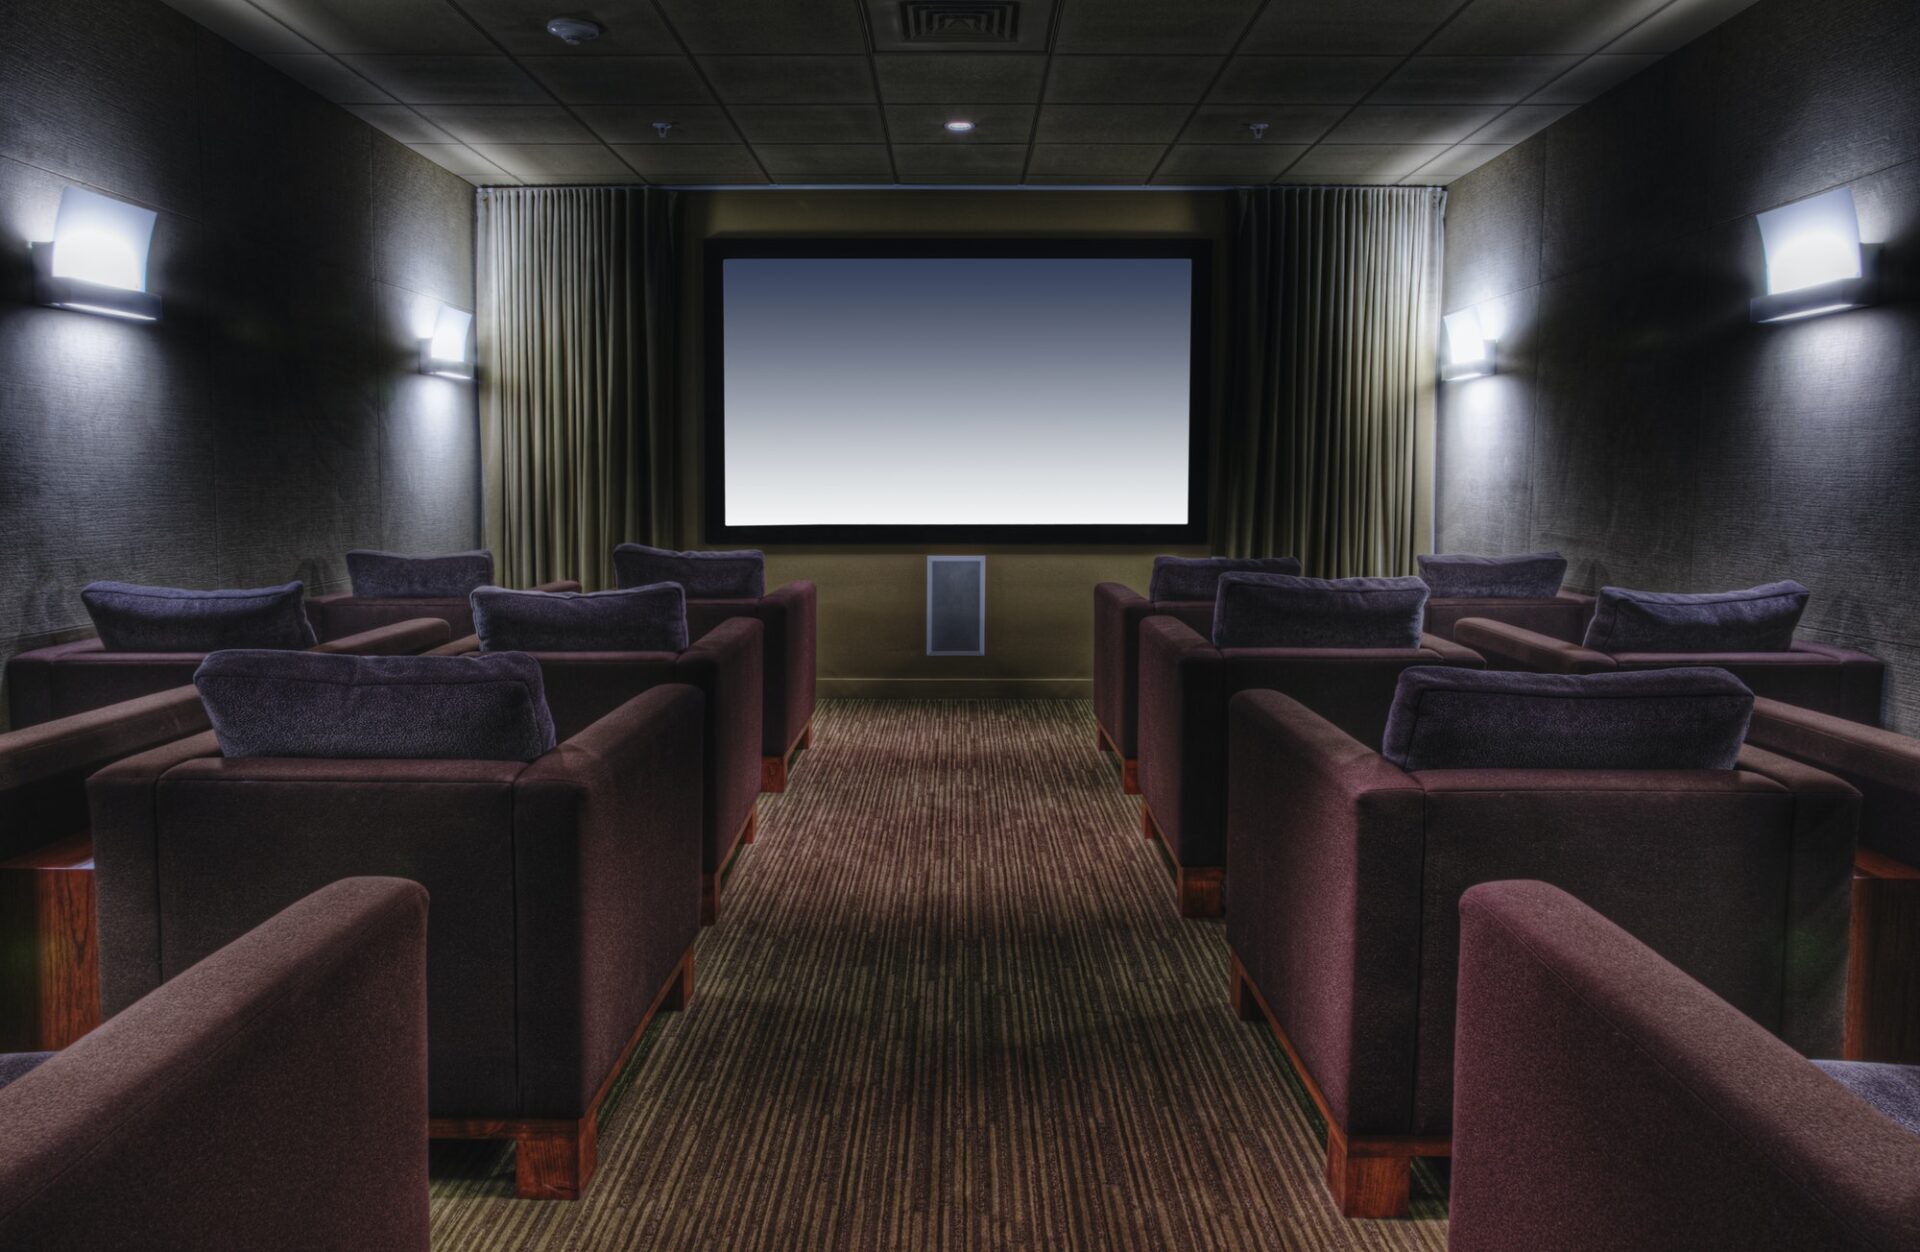 Empty chairs in luxury movie theater